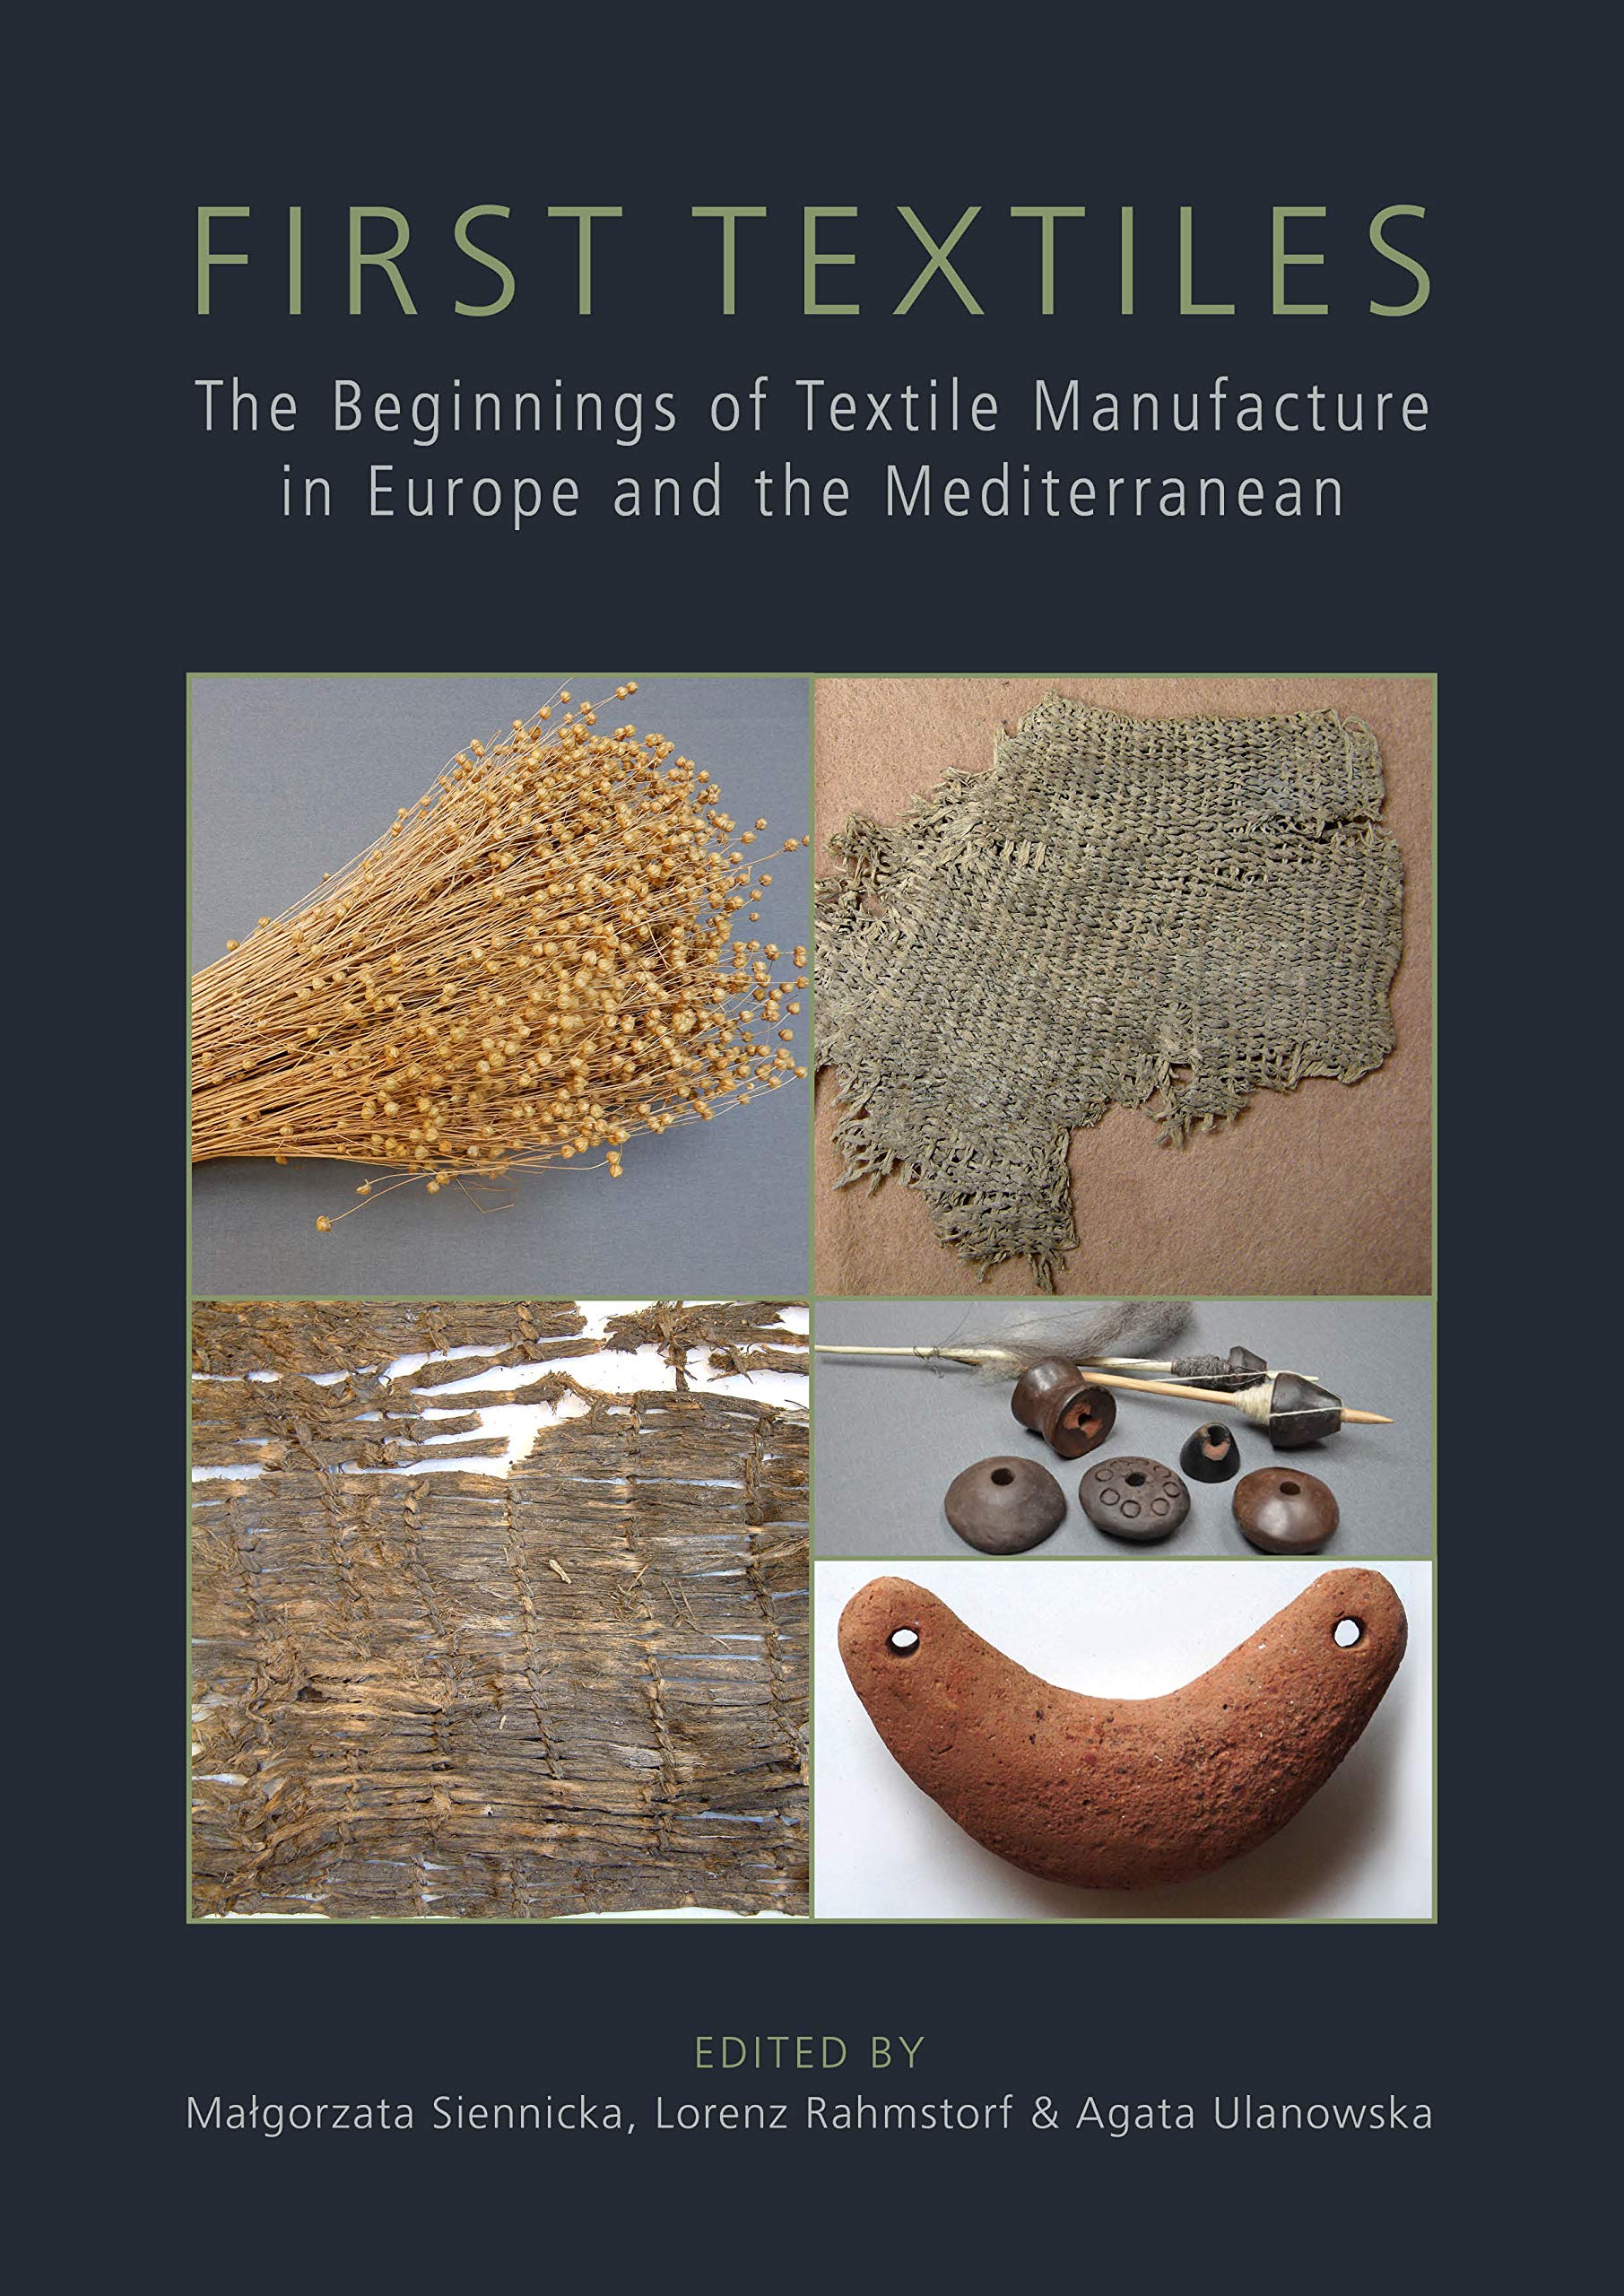 First Textiles. The Beginnings of Textile Manufacture in Europe and the Mediterranean, 2018, 272 p.